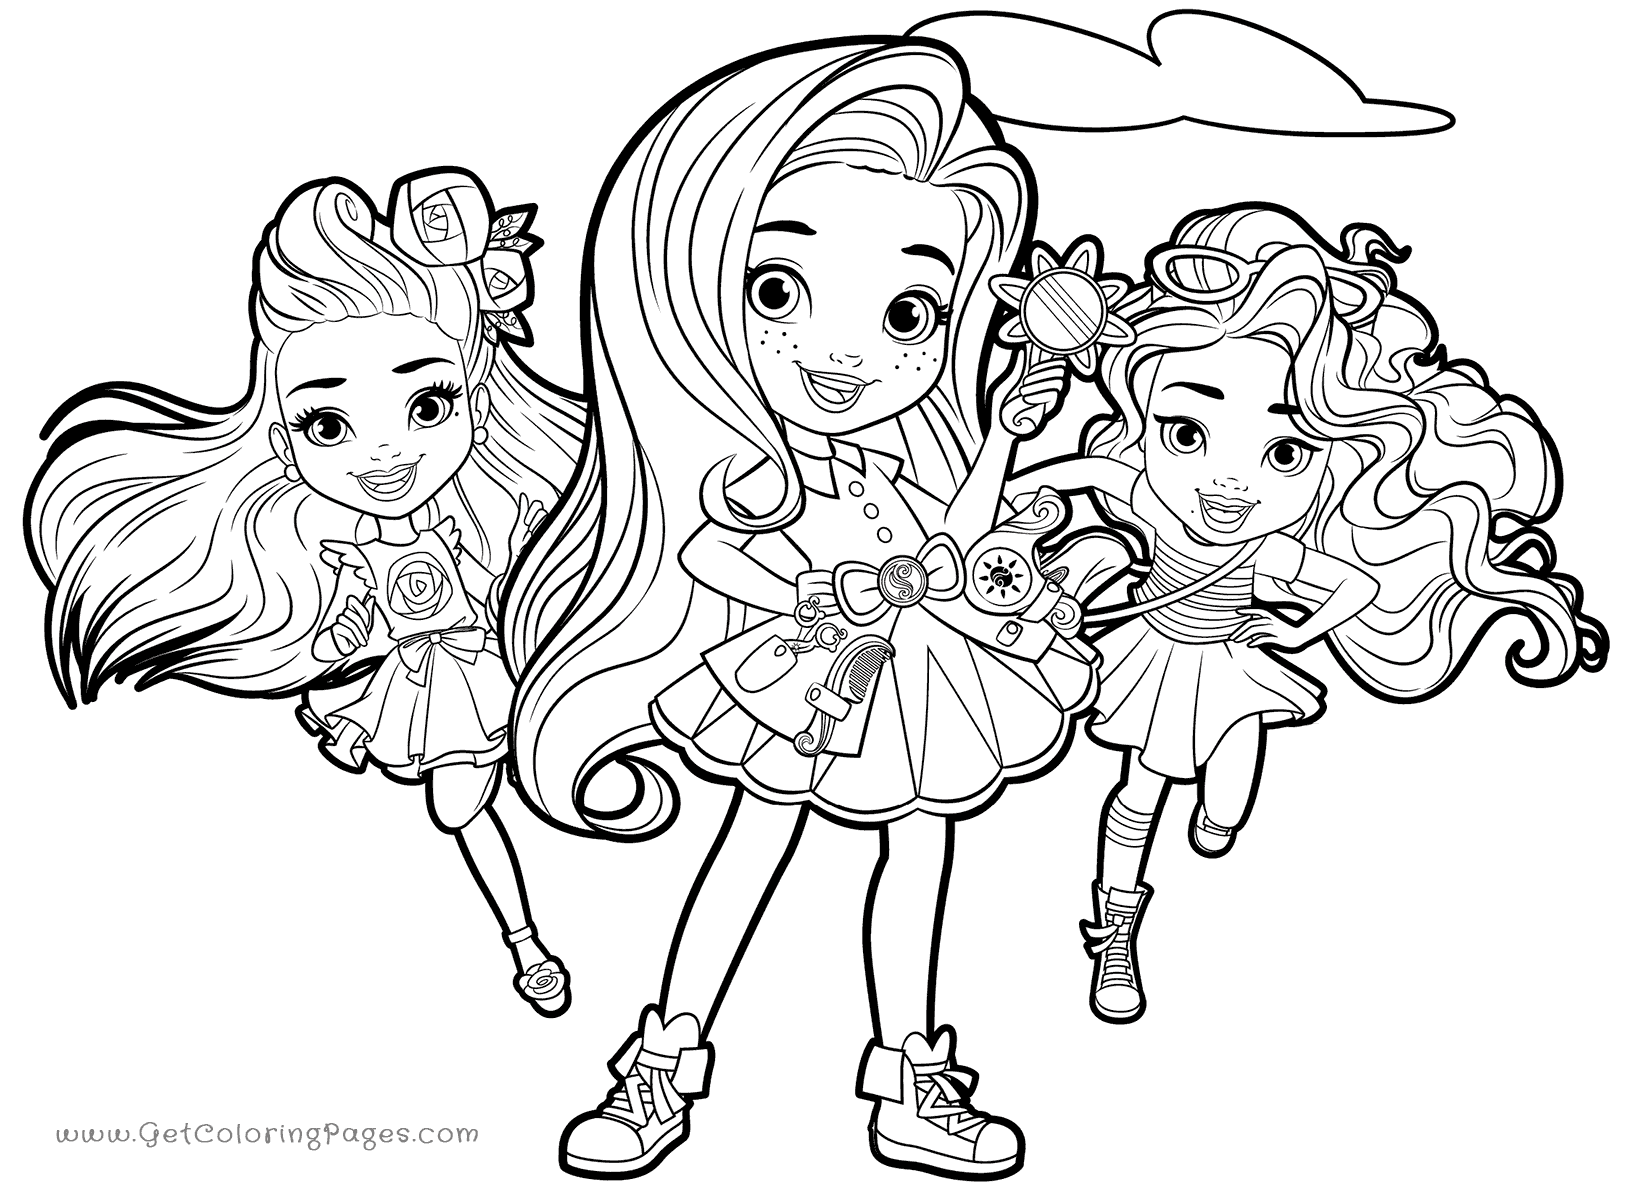 Sunny Coloring Pages at GetColorings.com | Free printable colorings